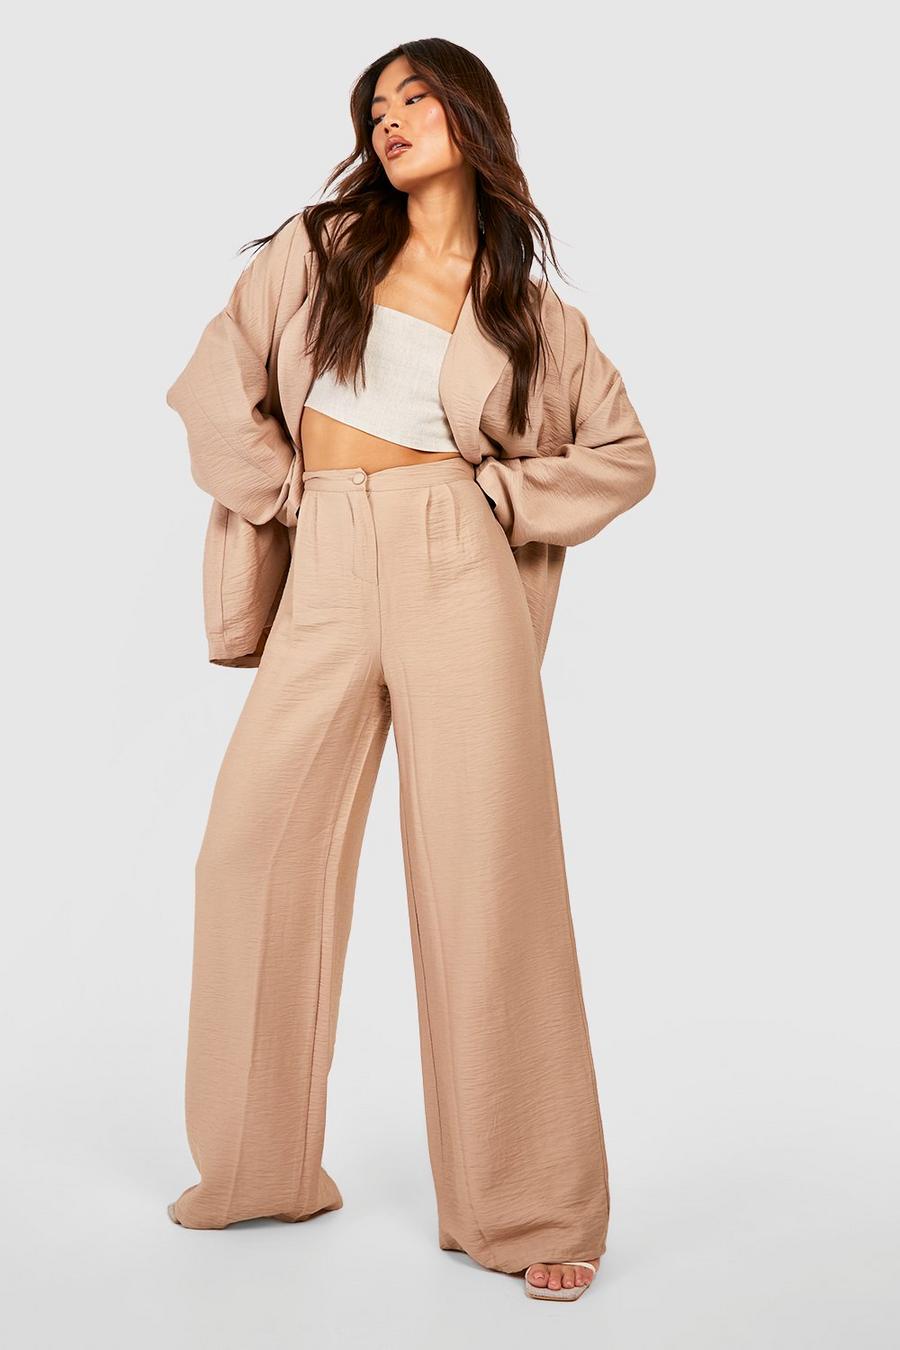 Camel beis Textured Pleat Front Wide Leg Trousers